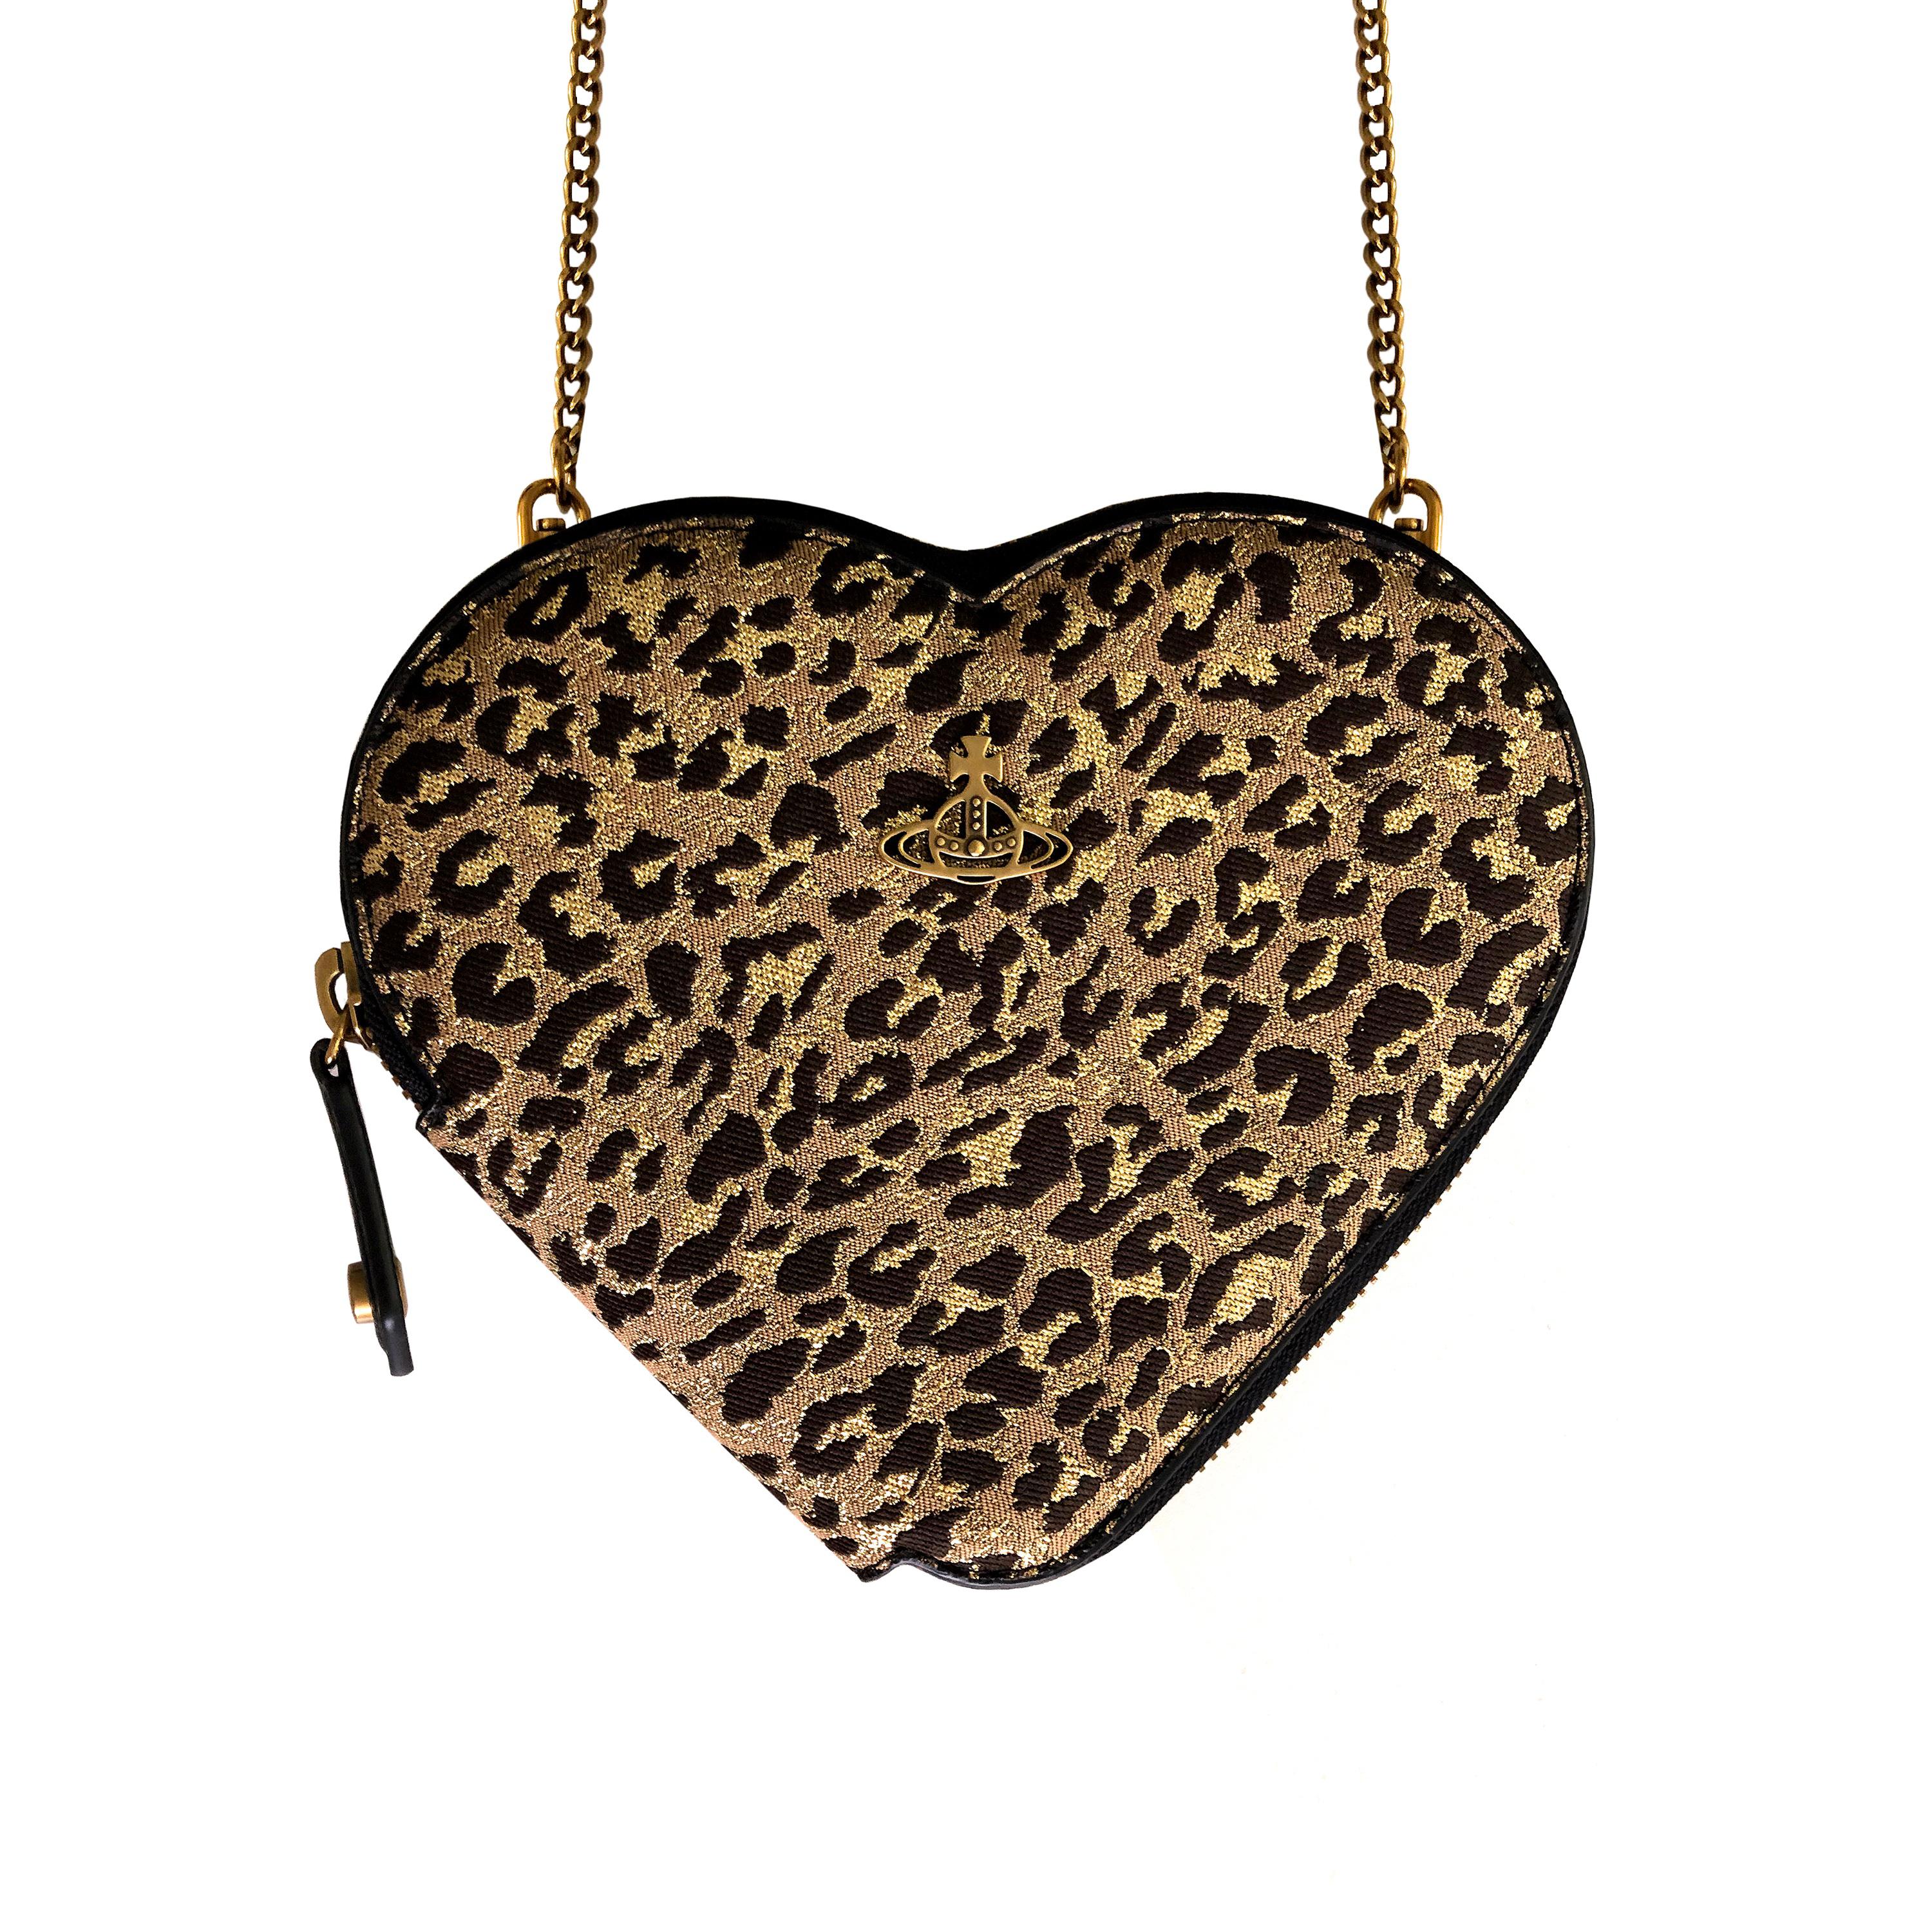 Vivienne Westwood - Heart Crossbody Bag - Gold Leopard Jacquard - NEW With Tags For Sale 3